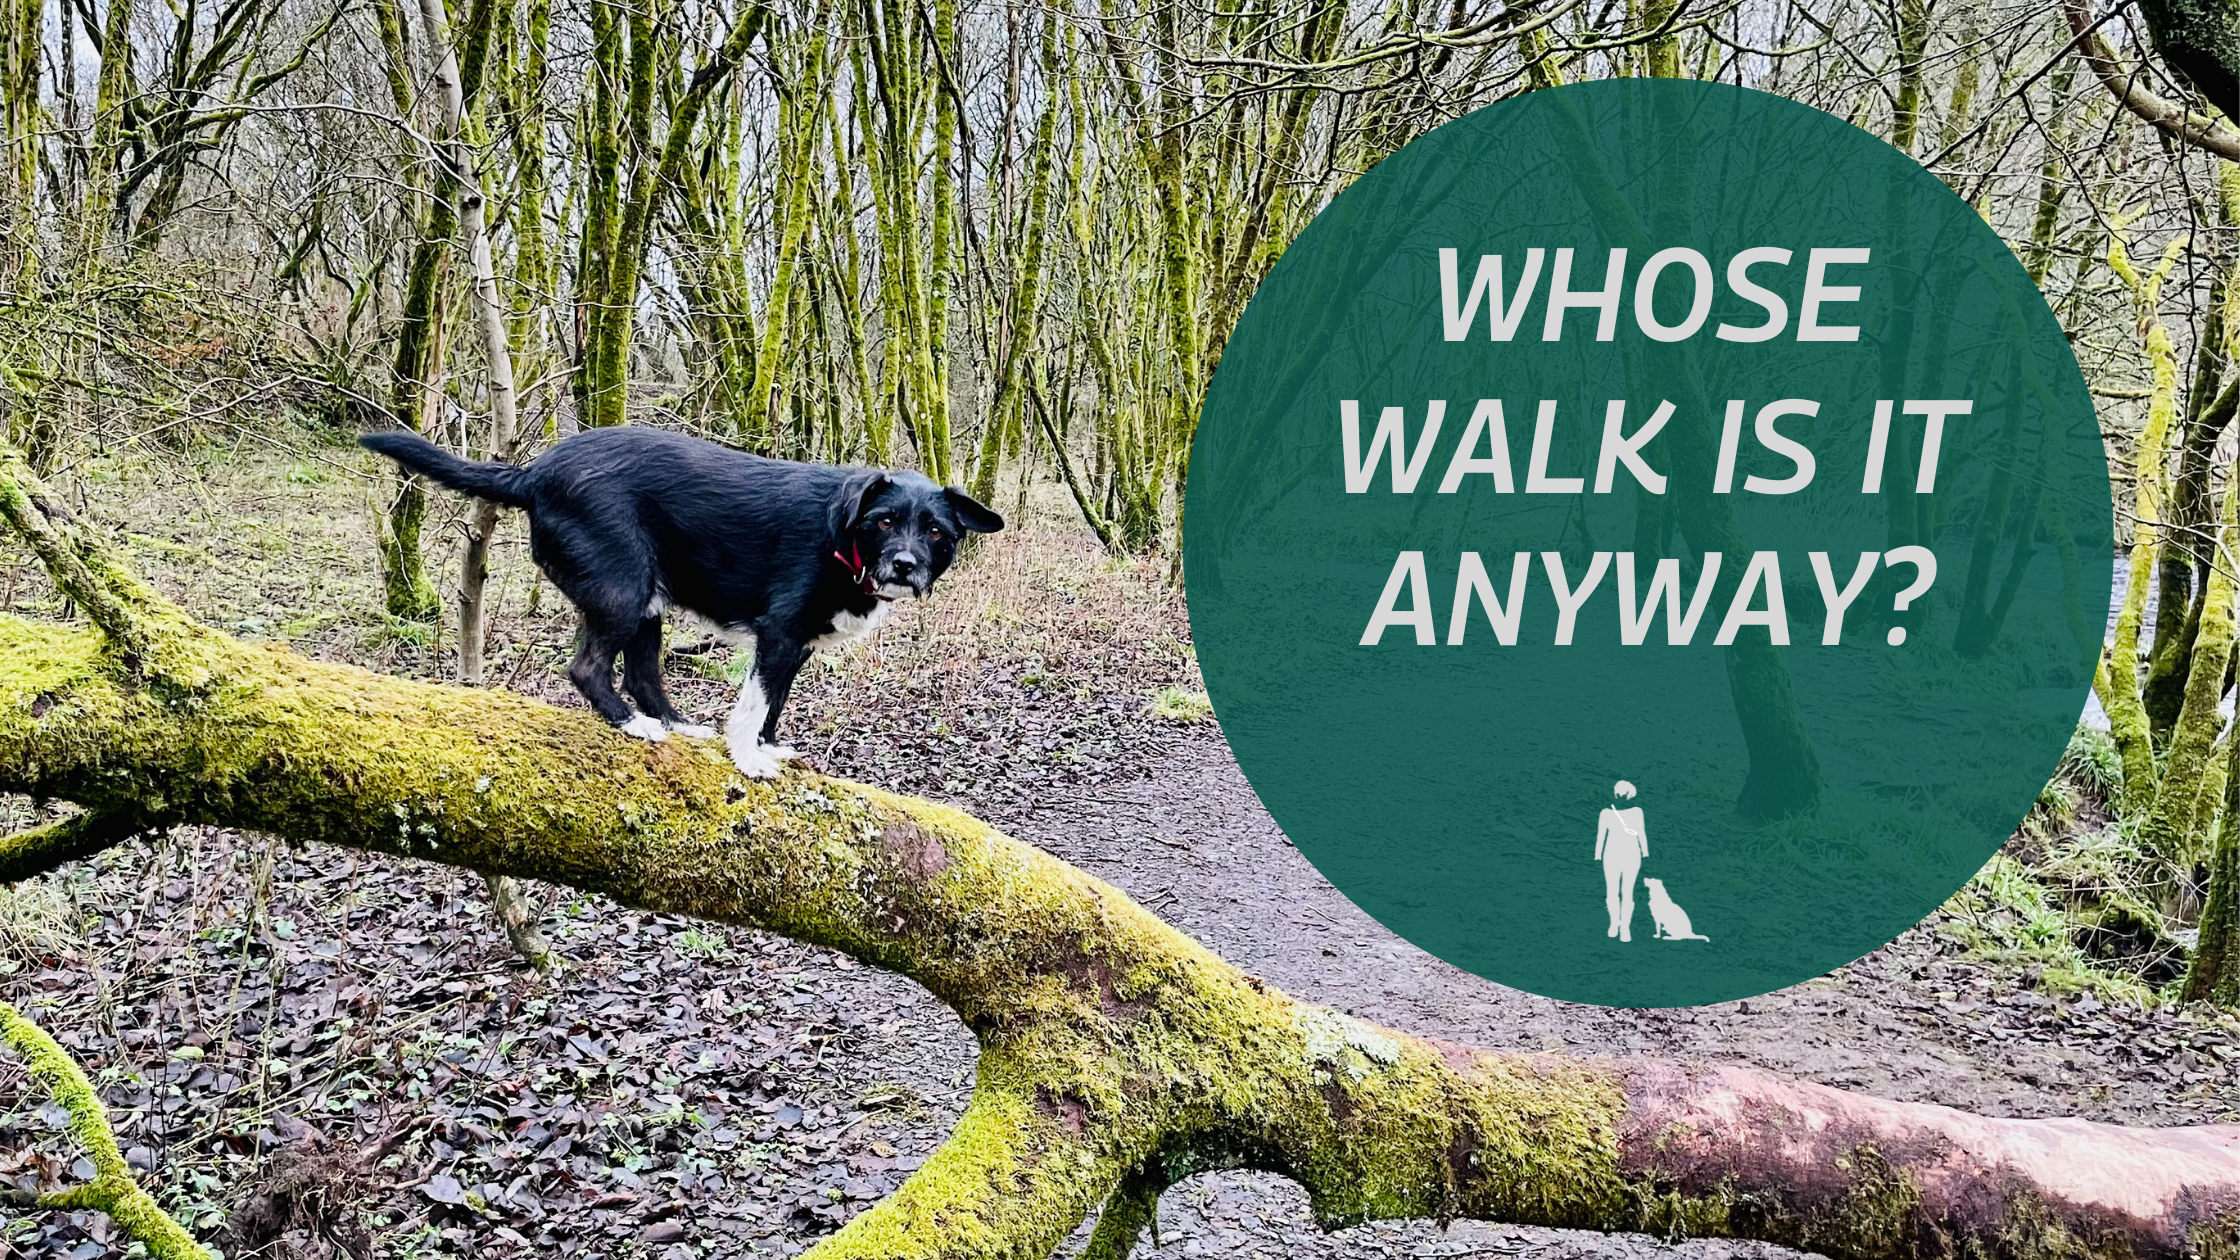 Whose Walk Is It Anyway?